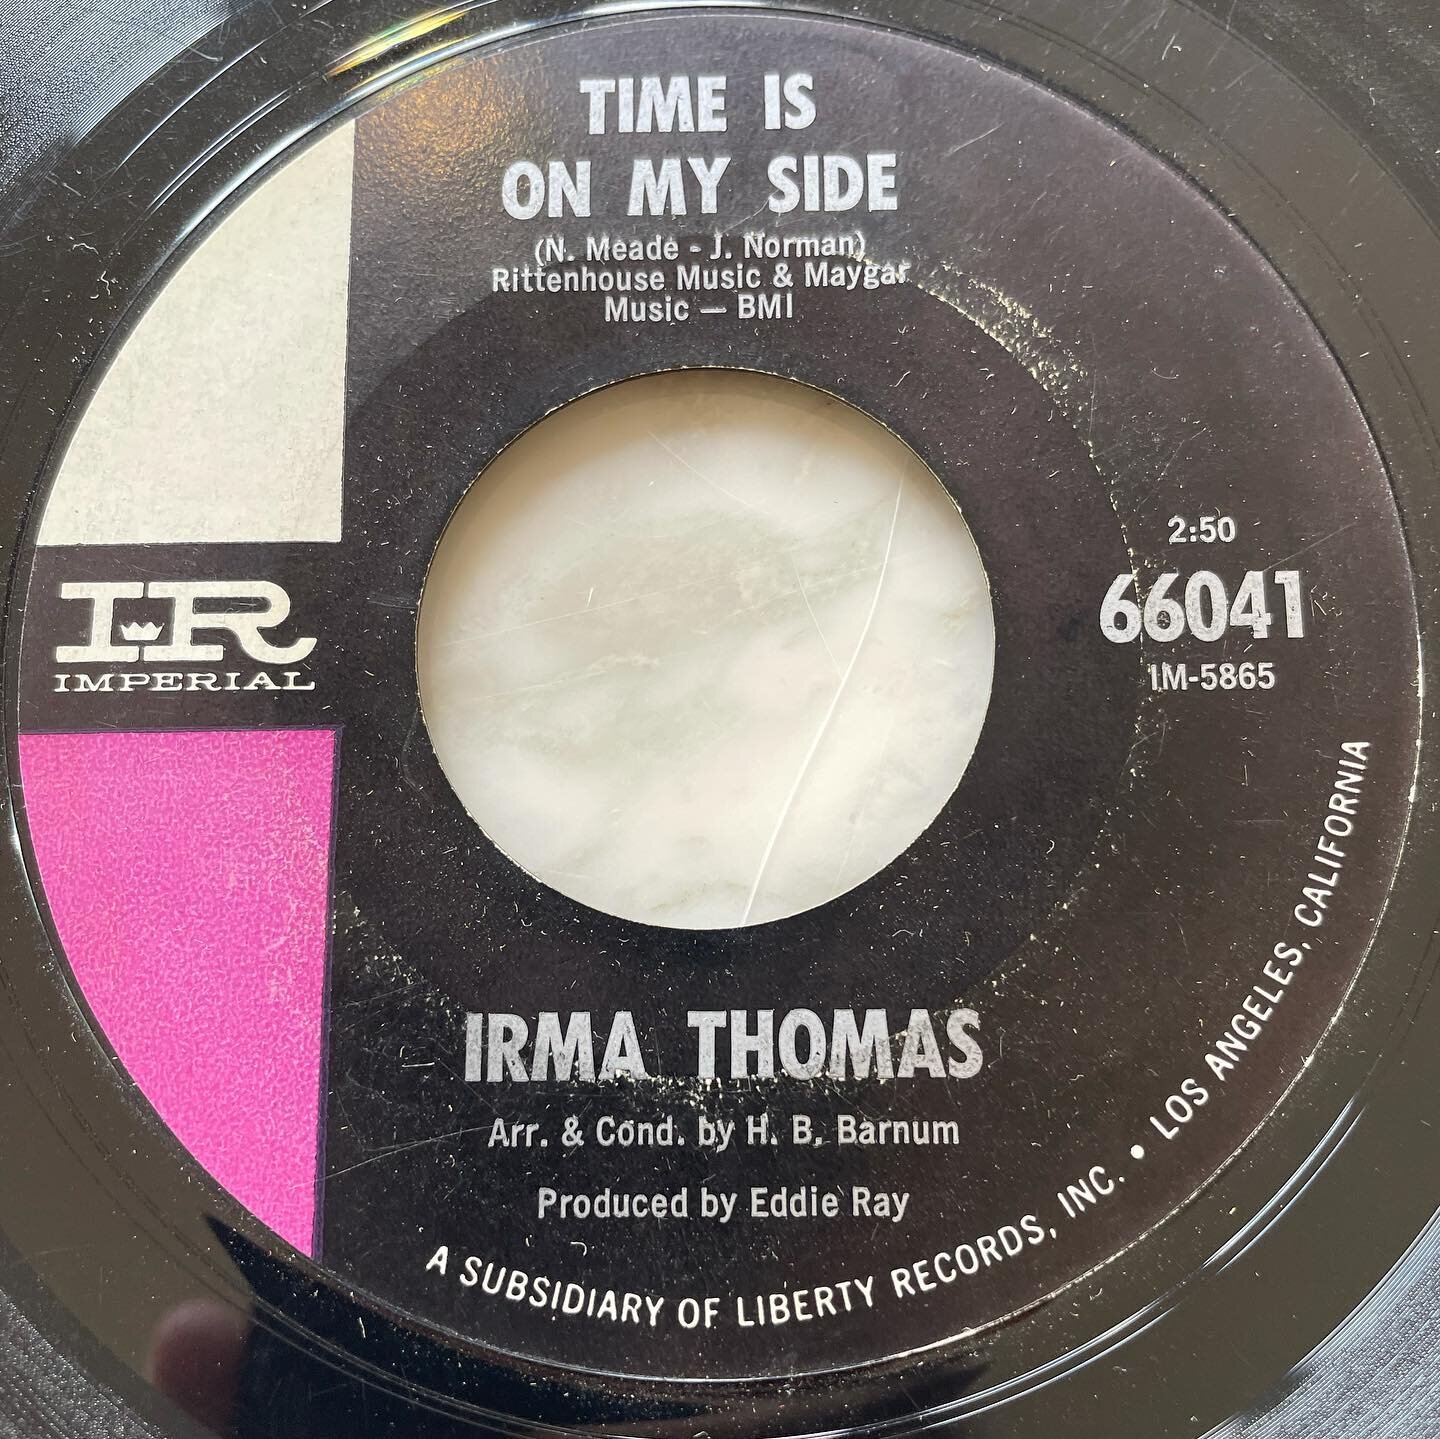 THE ORIGINALS: These American originals were later made famous by other artists: 1) Time Is On My Side by Irma Thomas was covered by The Rolling Stones in 1964 and became their first U.S. Top Ten.  2) It&rsquo;s All Over Now by The Valentinos was mad